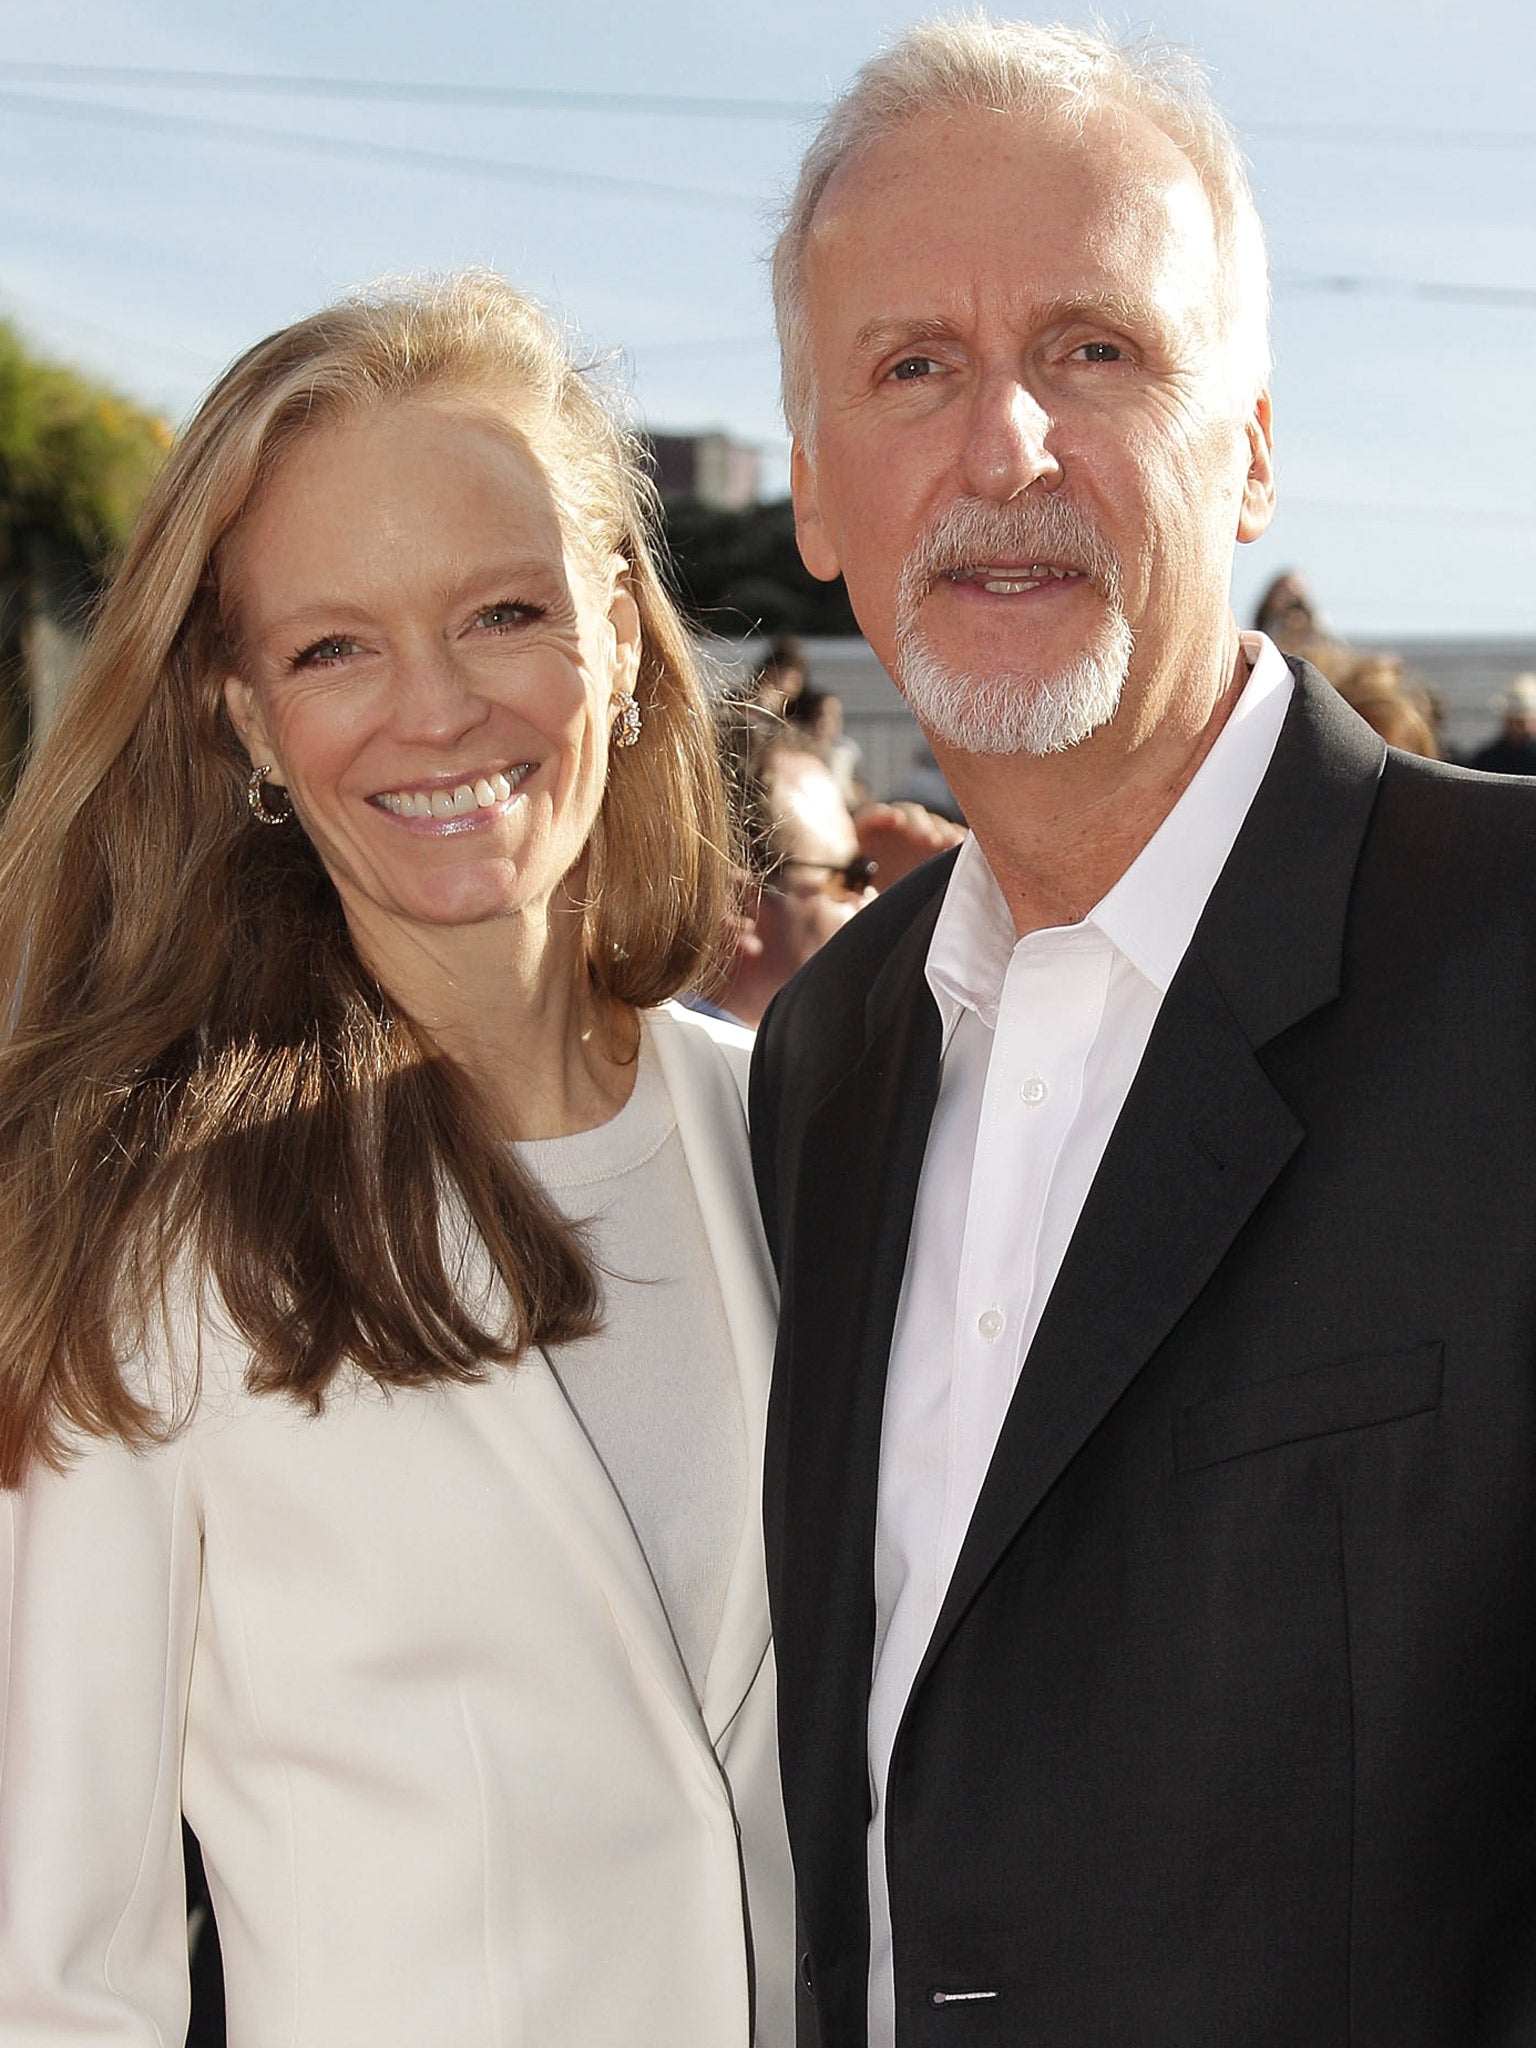 Cameron (pictured with his wife Suzy Amis) claims he came up with the idea when he was a small boy